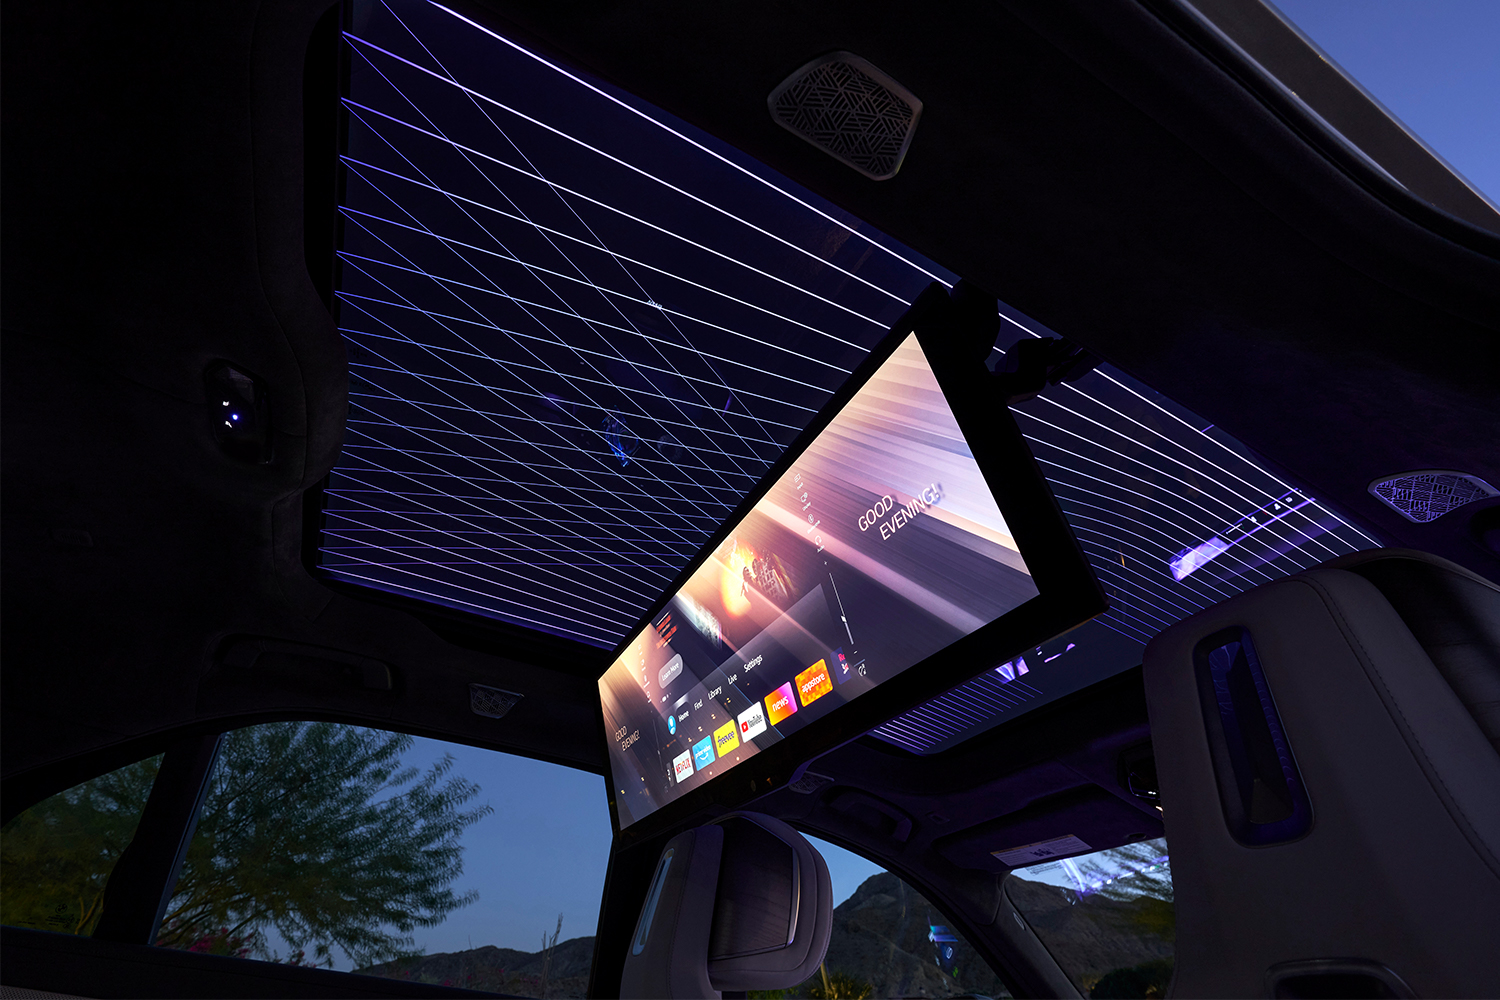 The enormous 31-inch back seat screen in the BMW i7